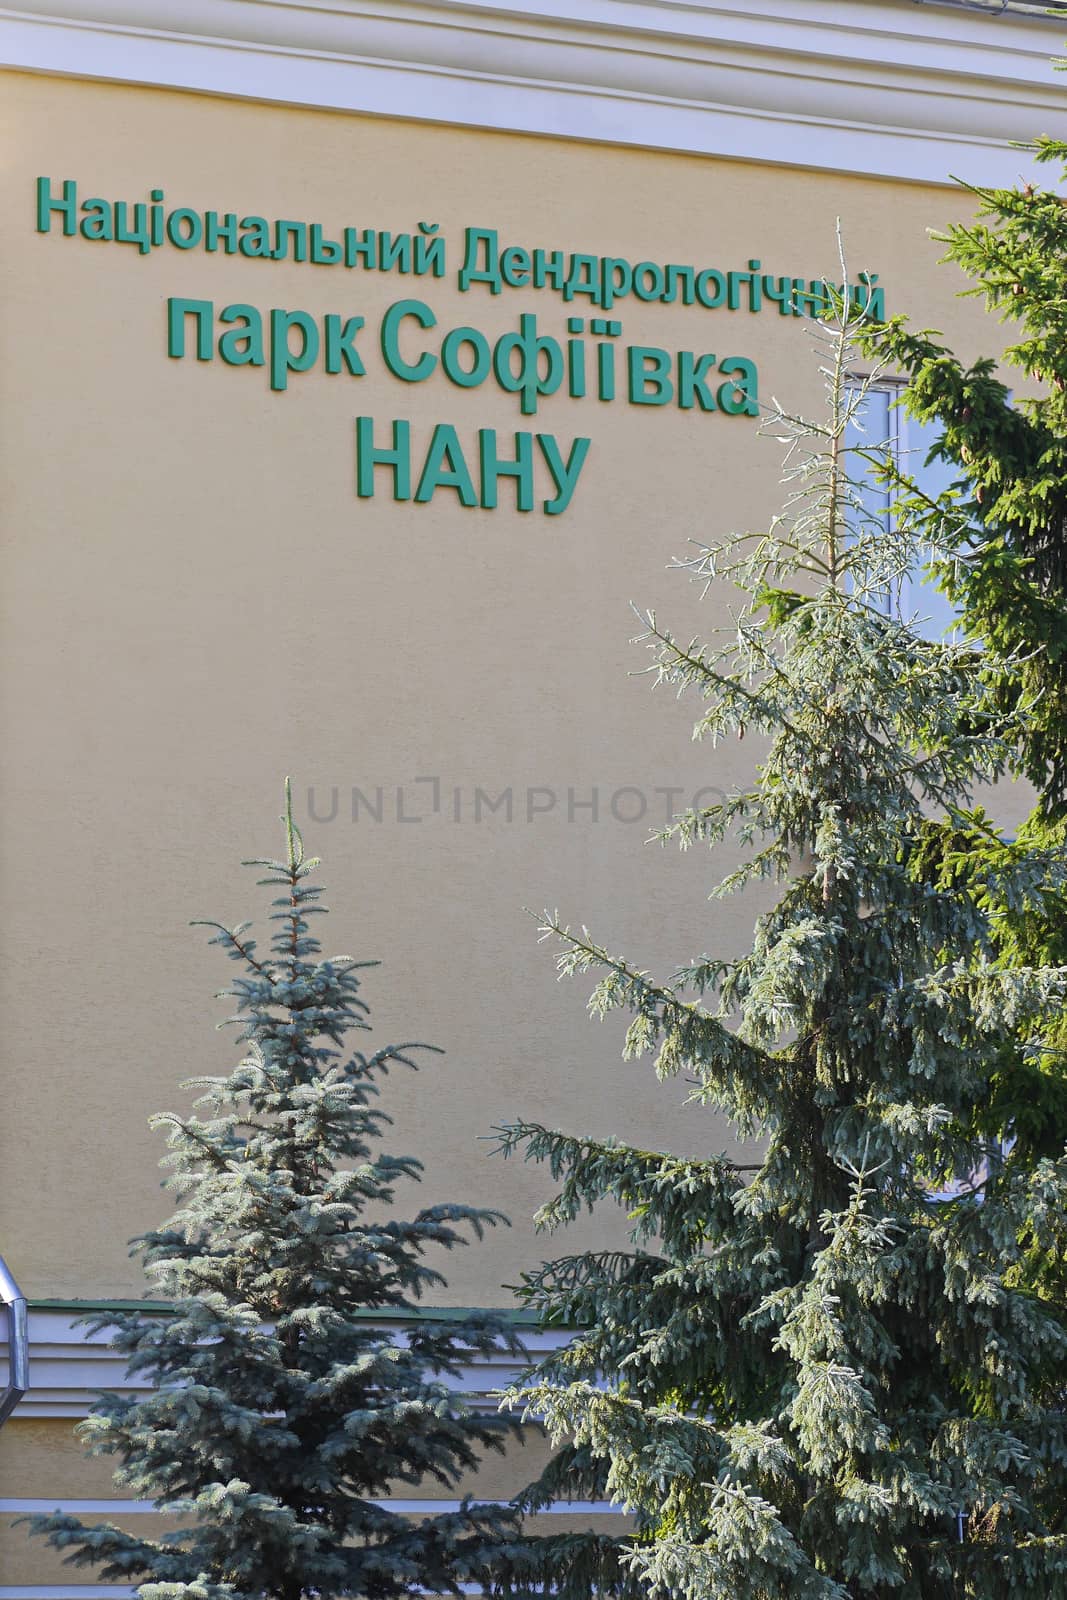 Building of the National Dendrological Park Sofivka in the shade of green tree branches